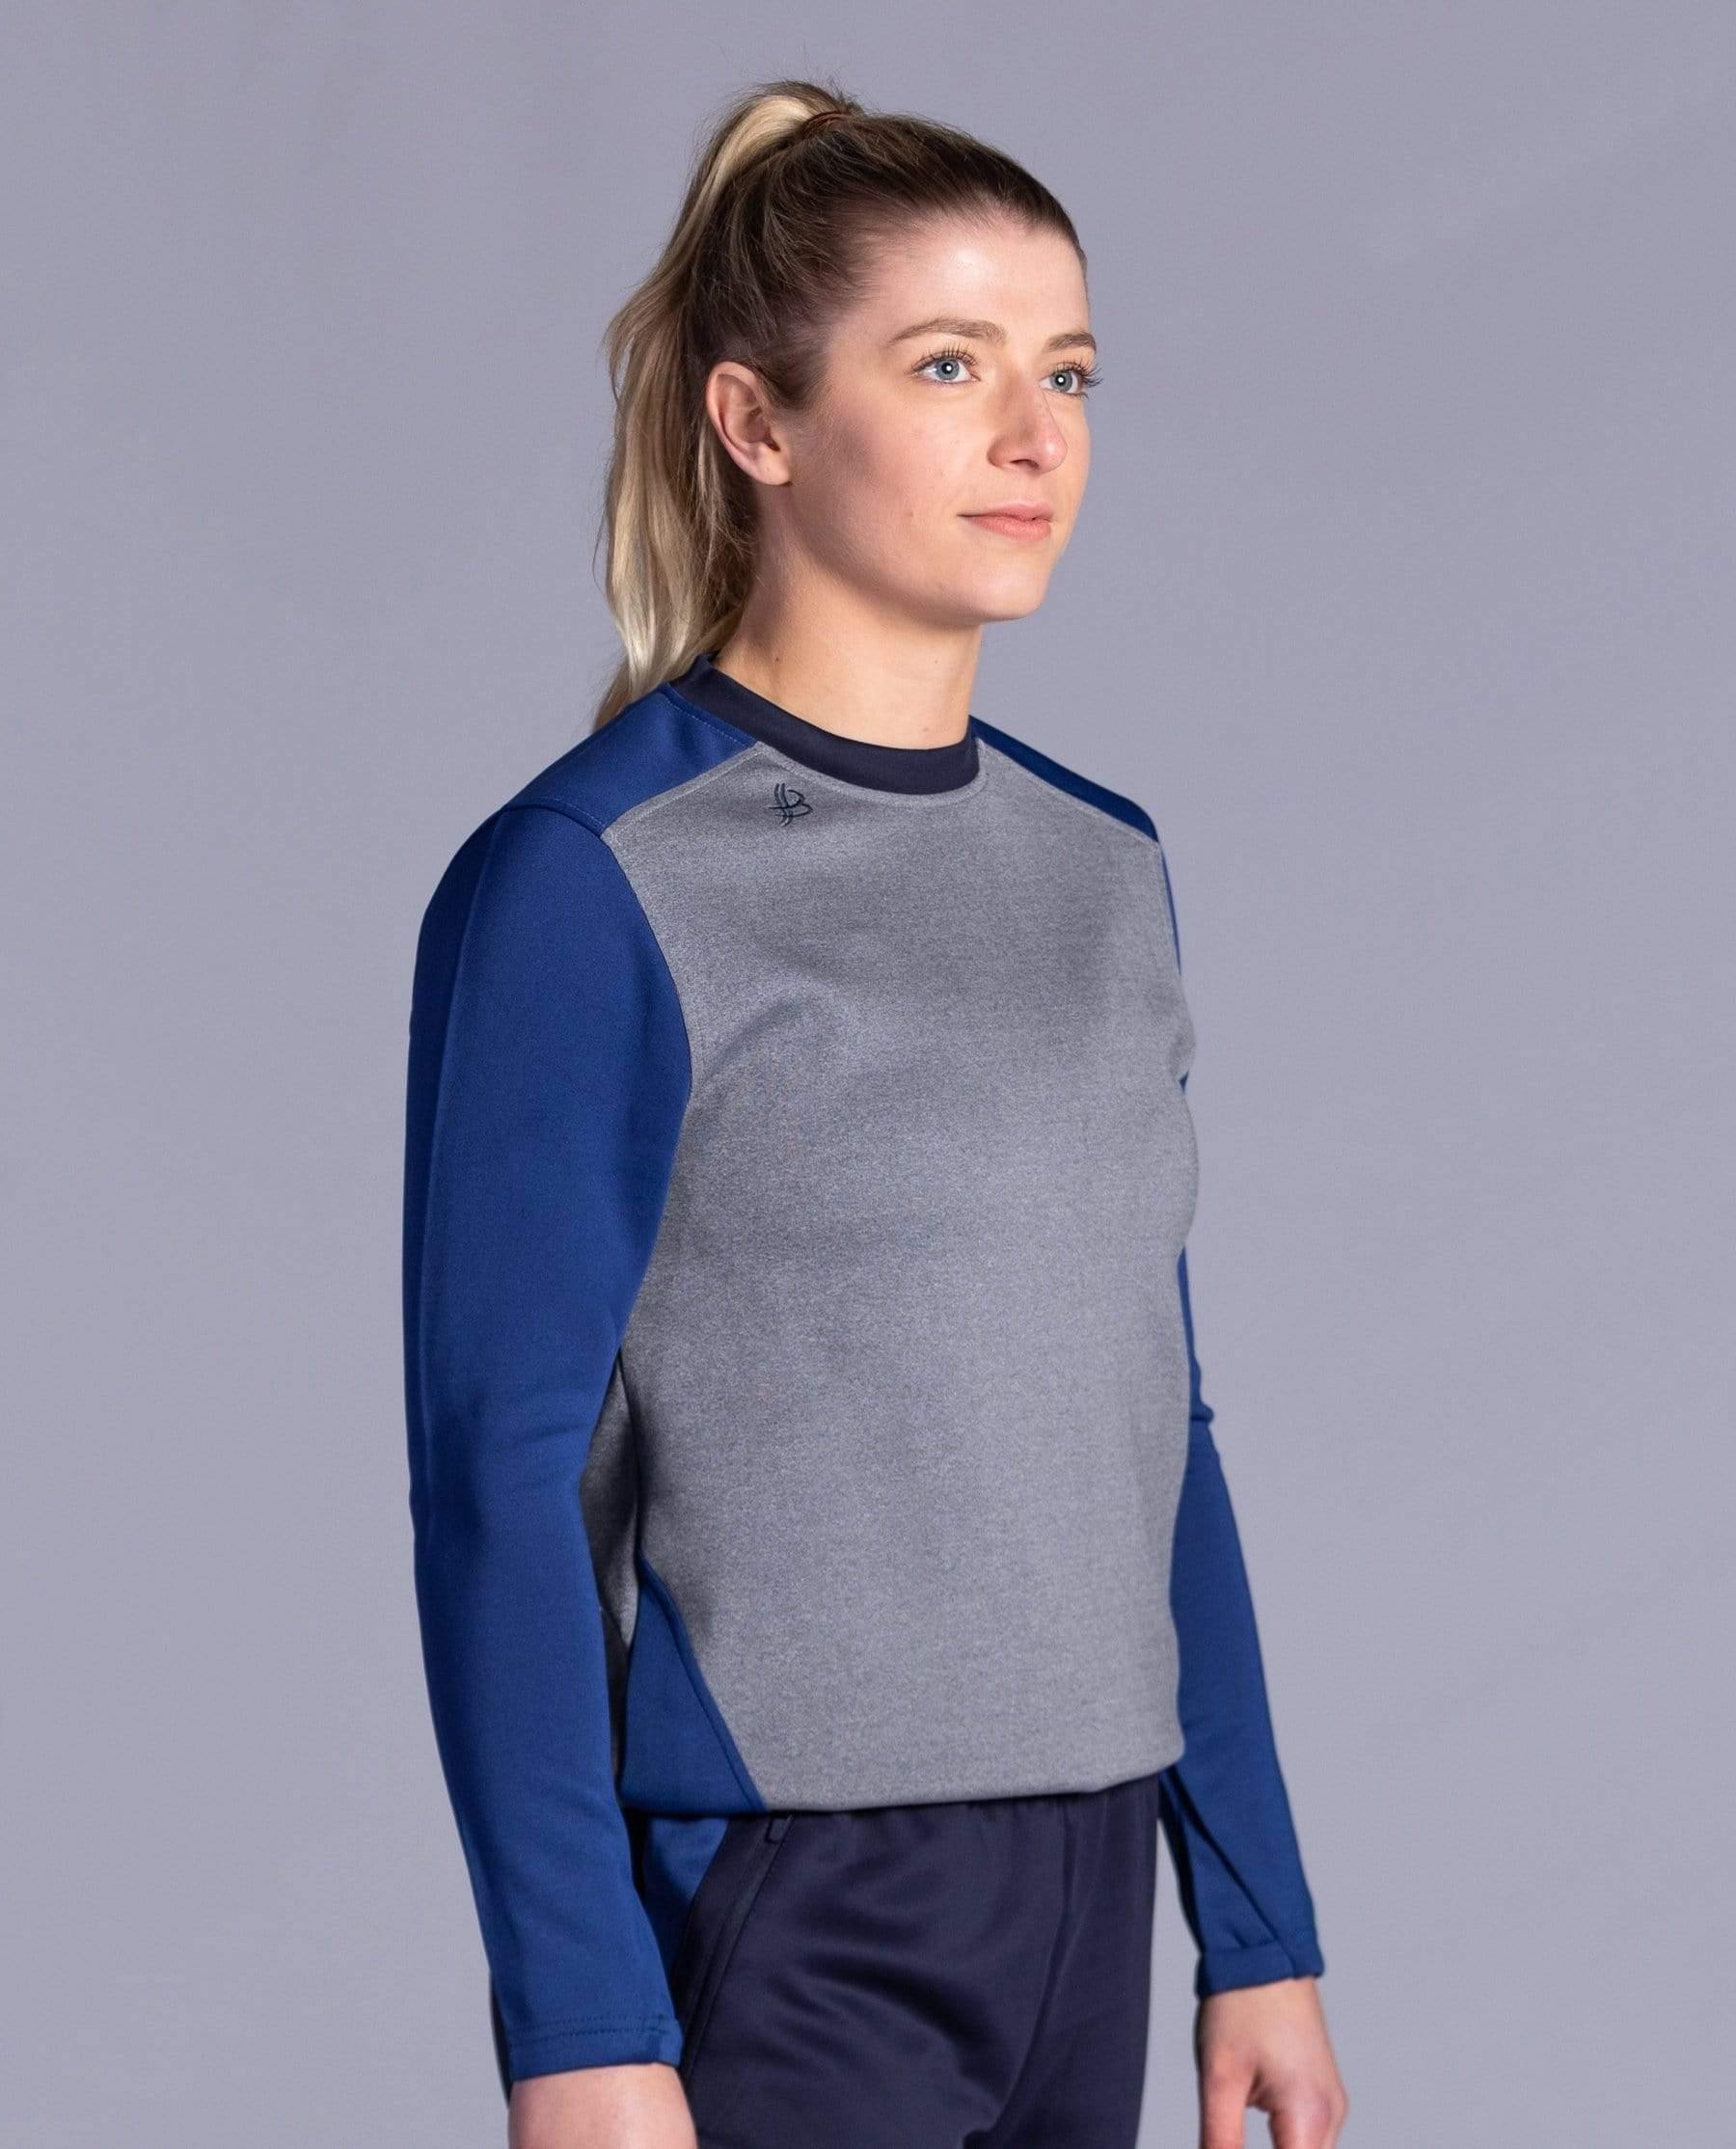 BUA20 Adult Crew Neck (Navy) - Bourke Sports Limited